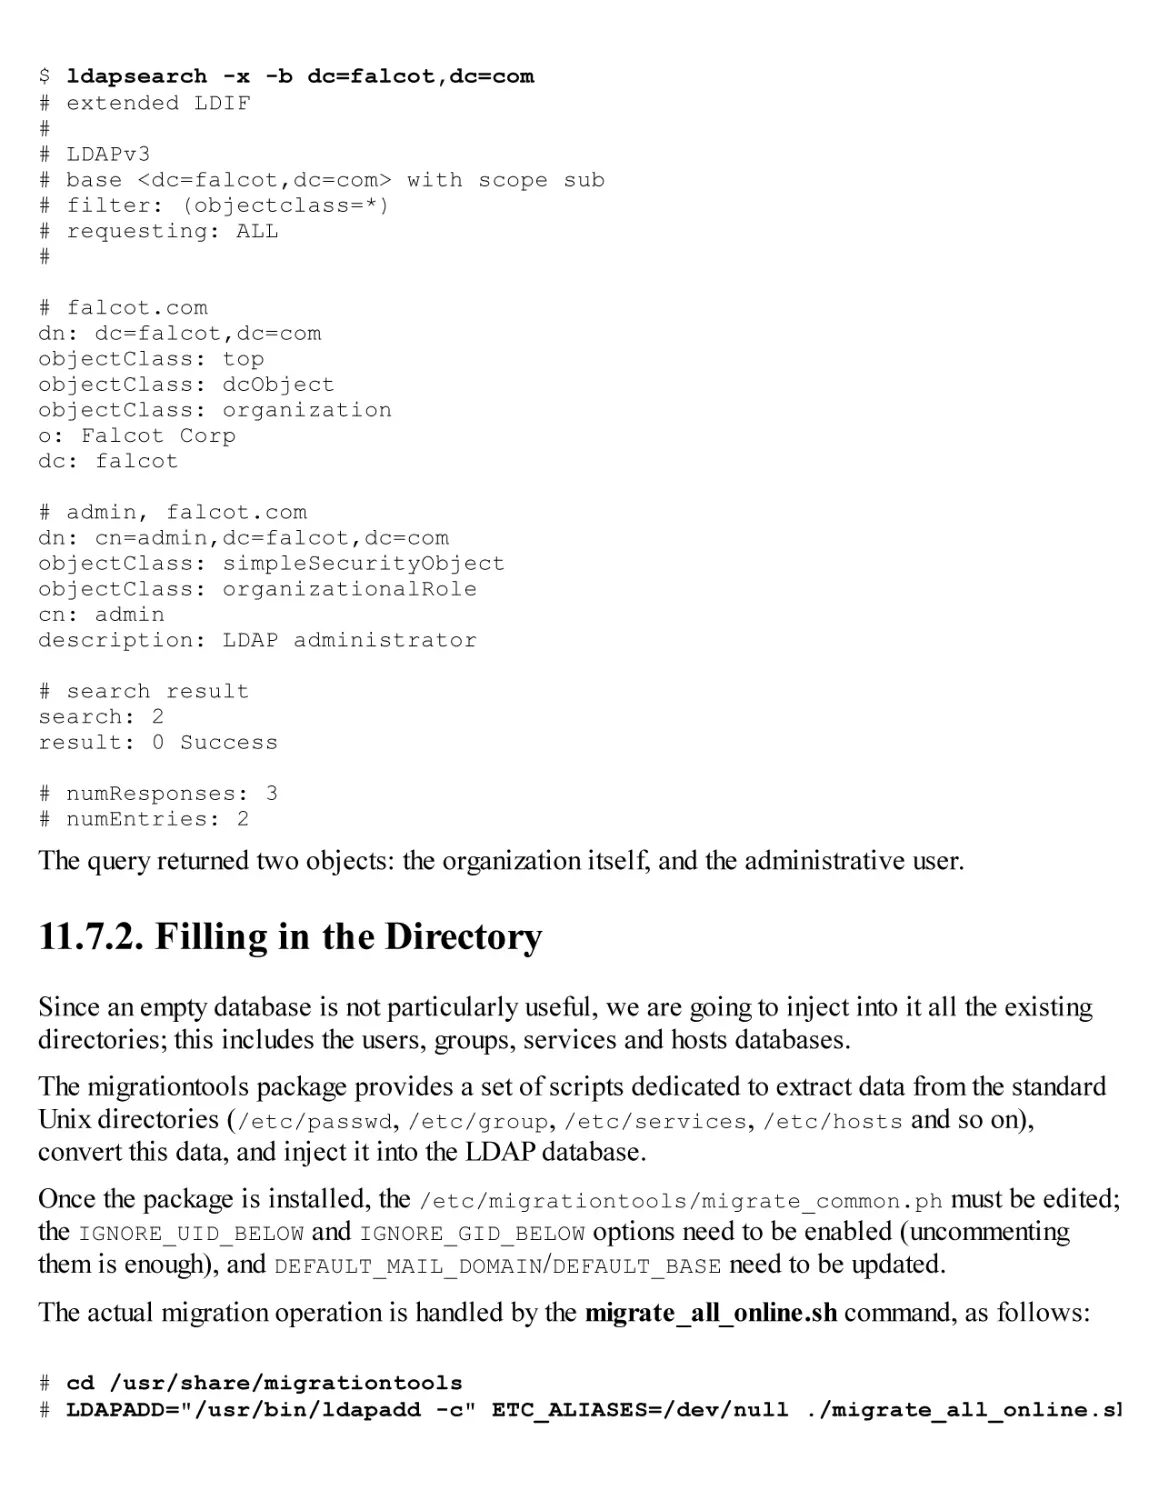 11.7.2. Filling in the Directory